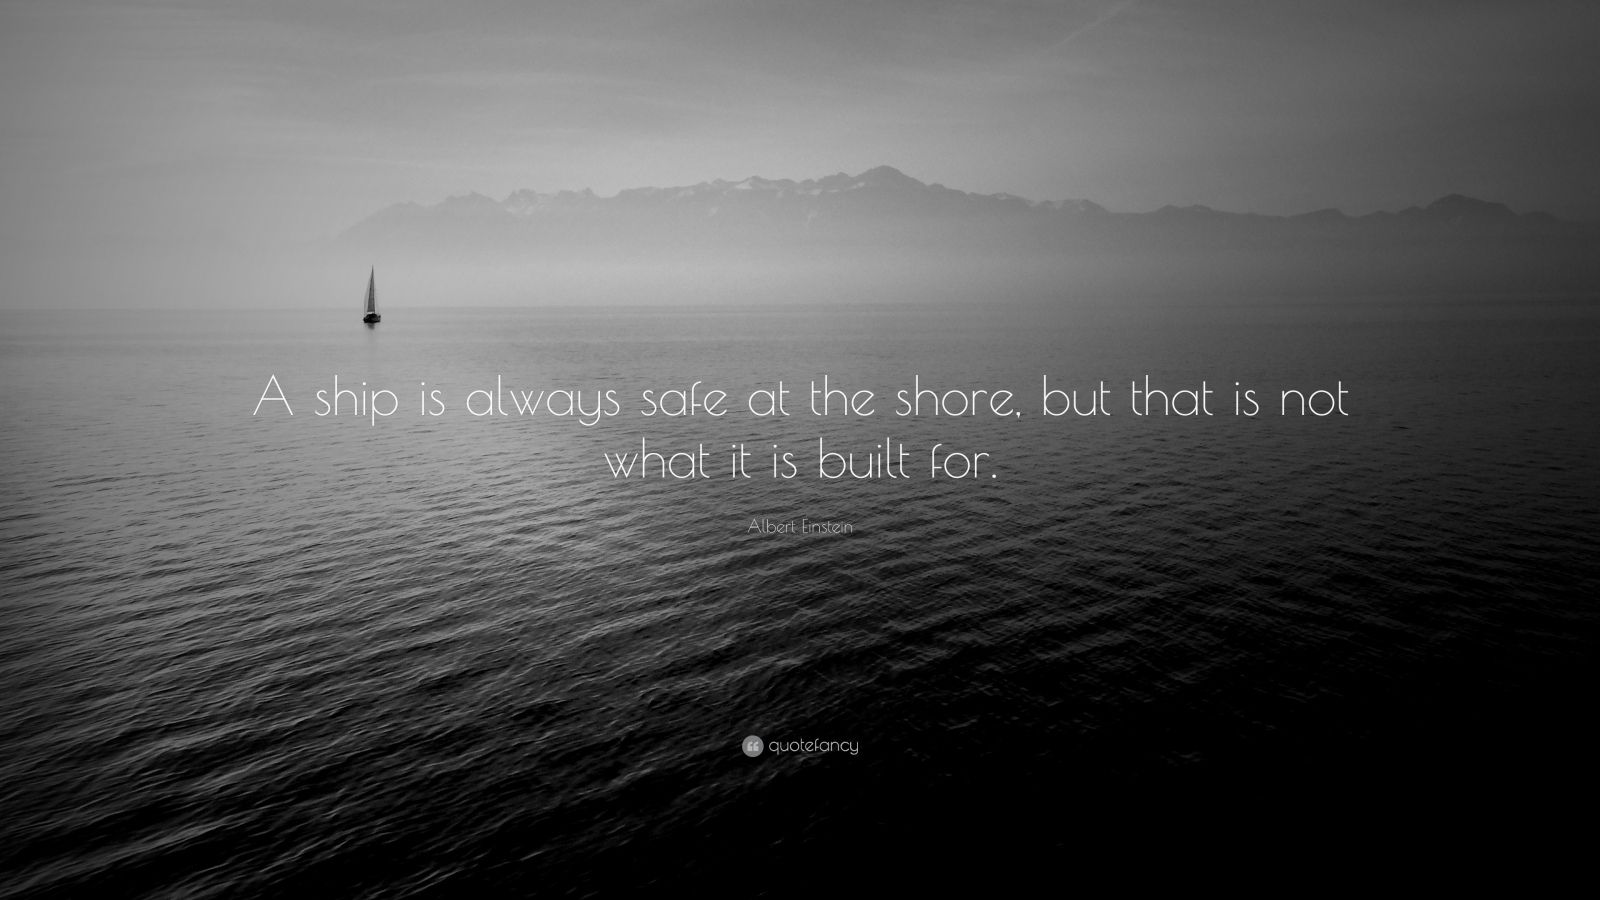 Quotefancy: Wallpapers With Inspirational Quotes